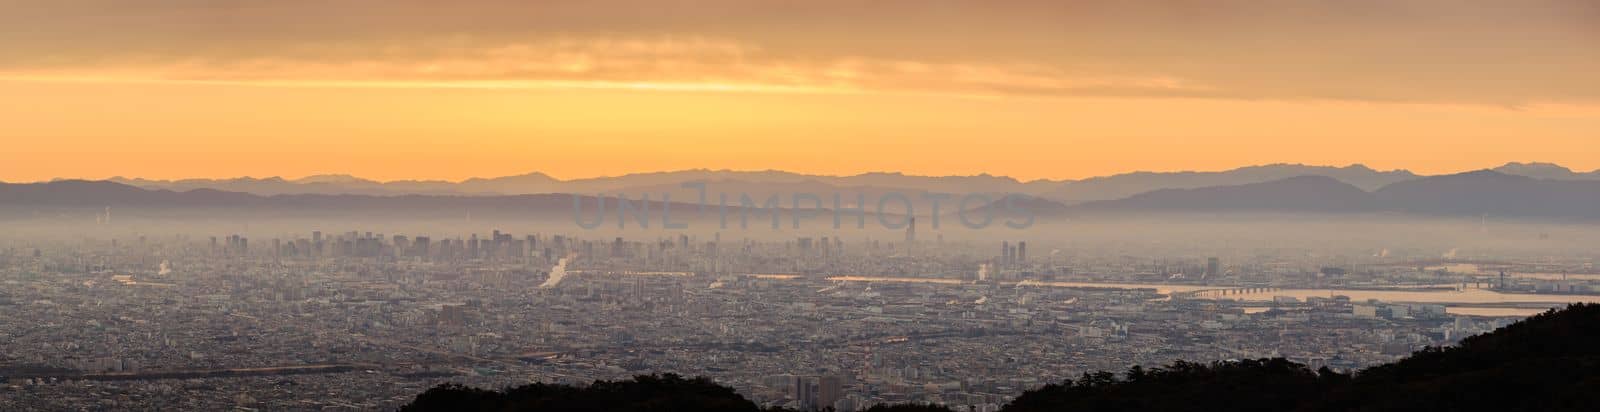 Panoramic view of haze layer over city with orange glow in sky at sunrise. High quality photo